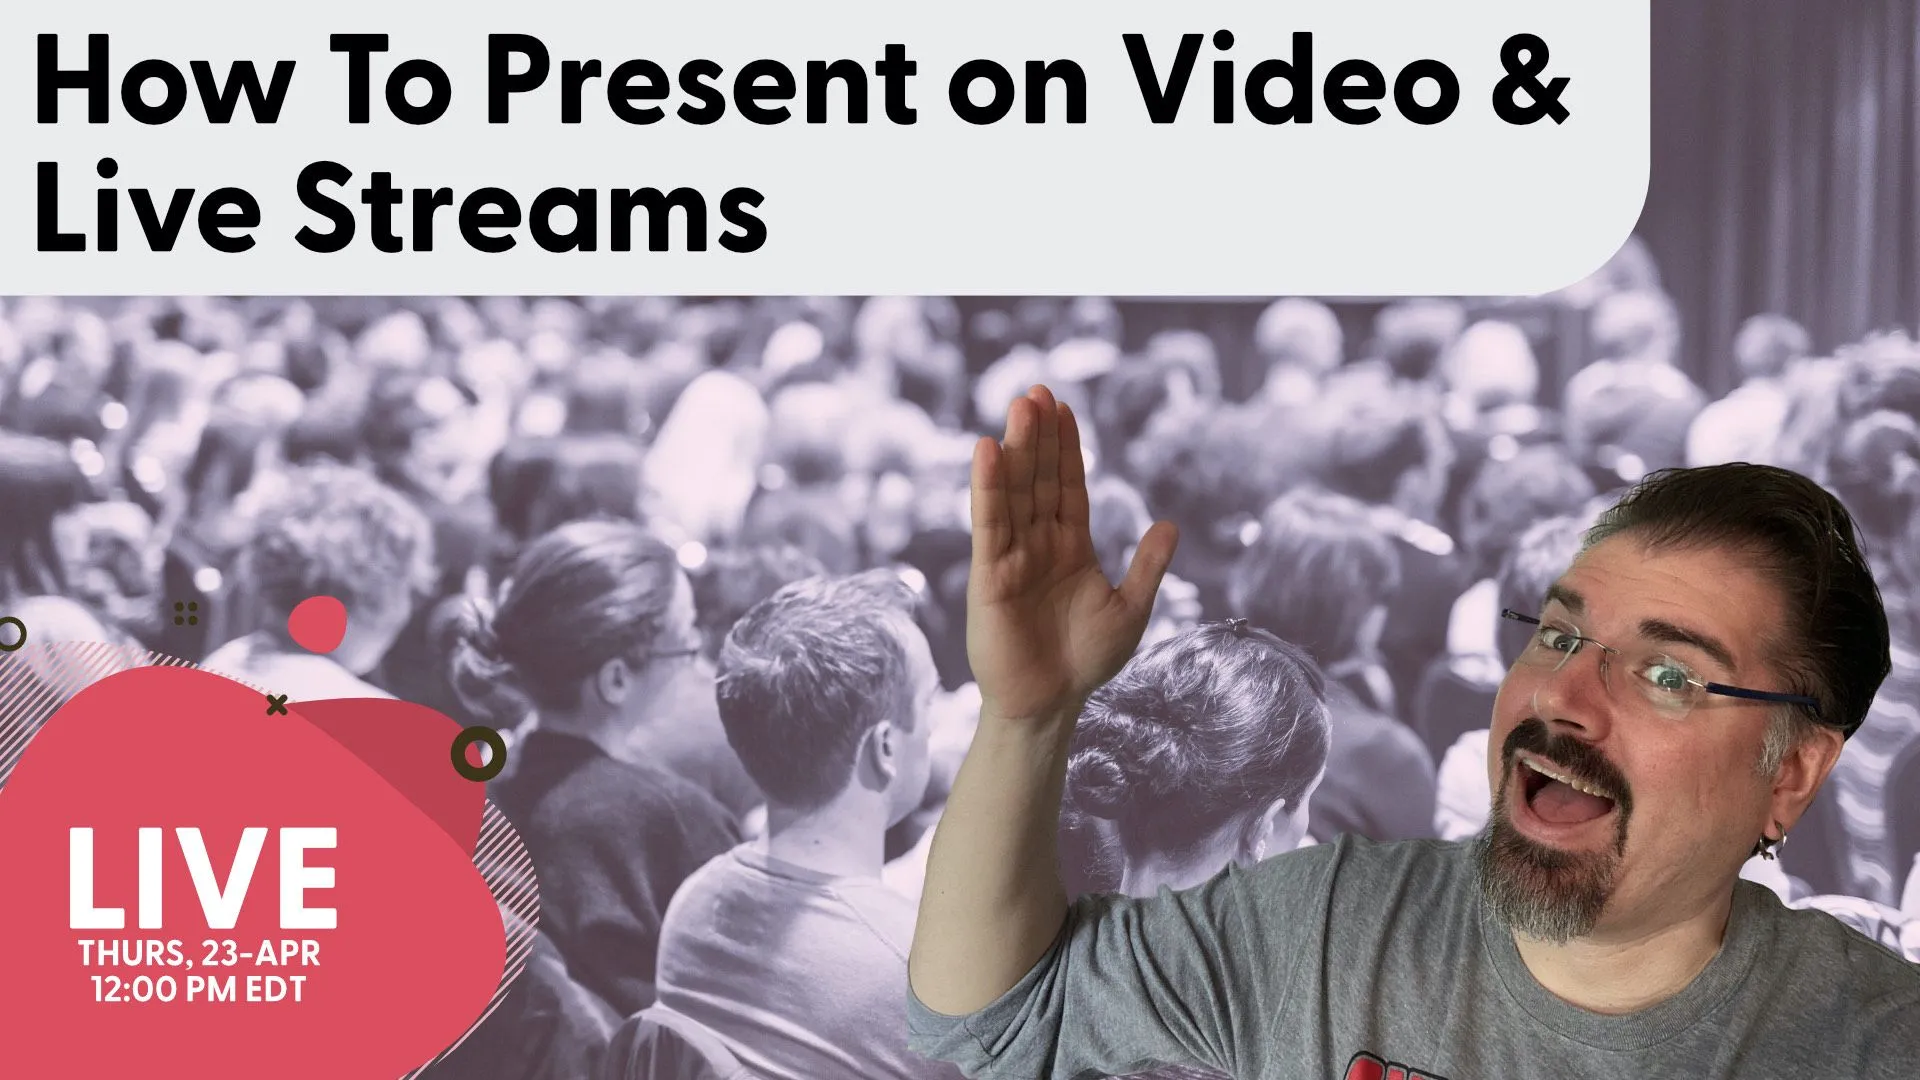 How to Present on Video and Live Streams